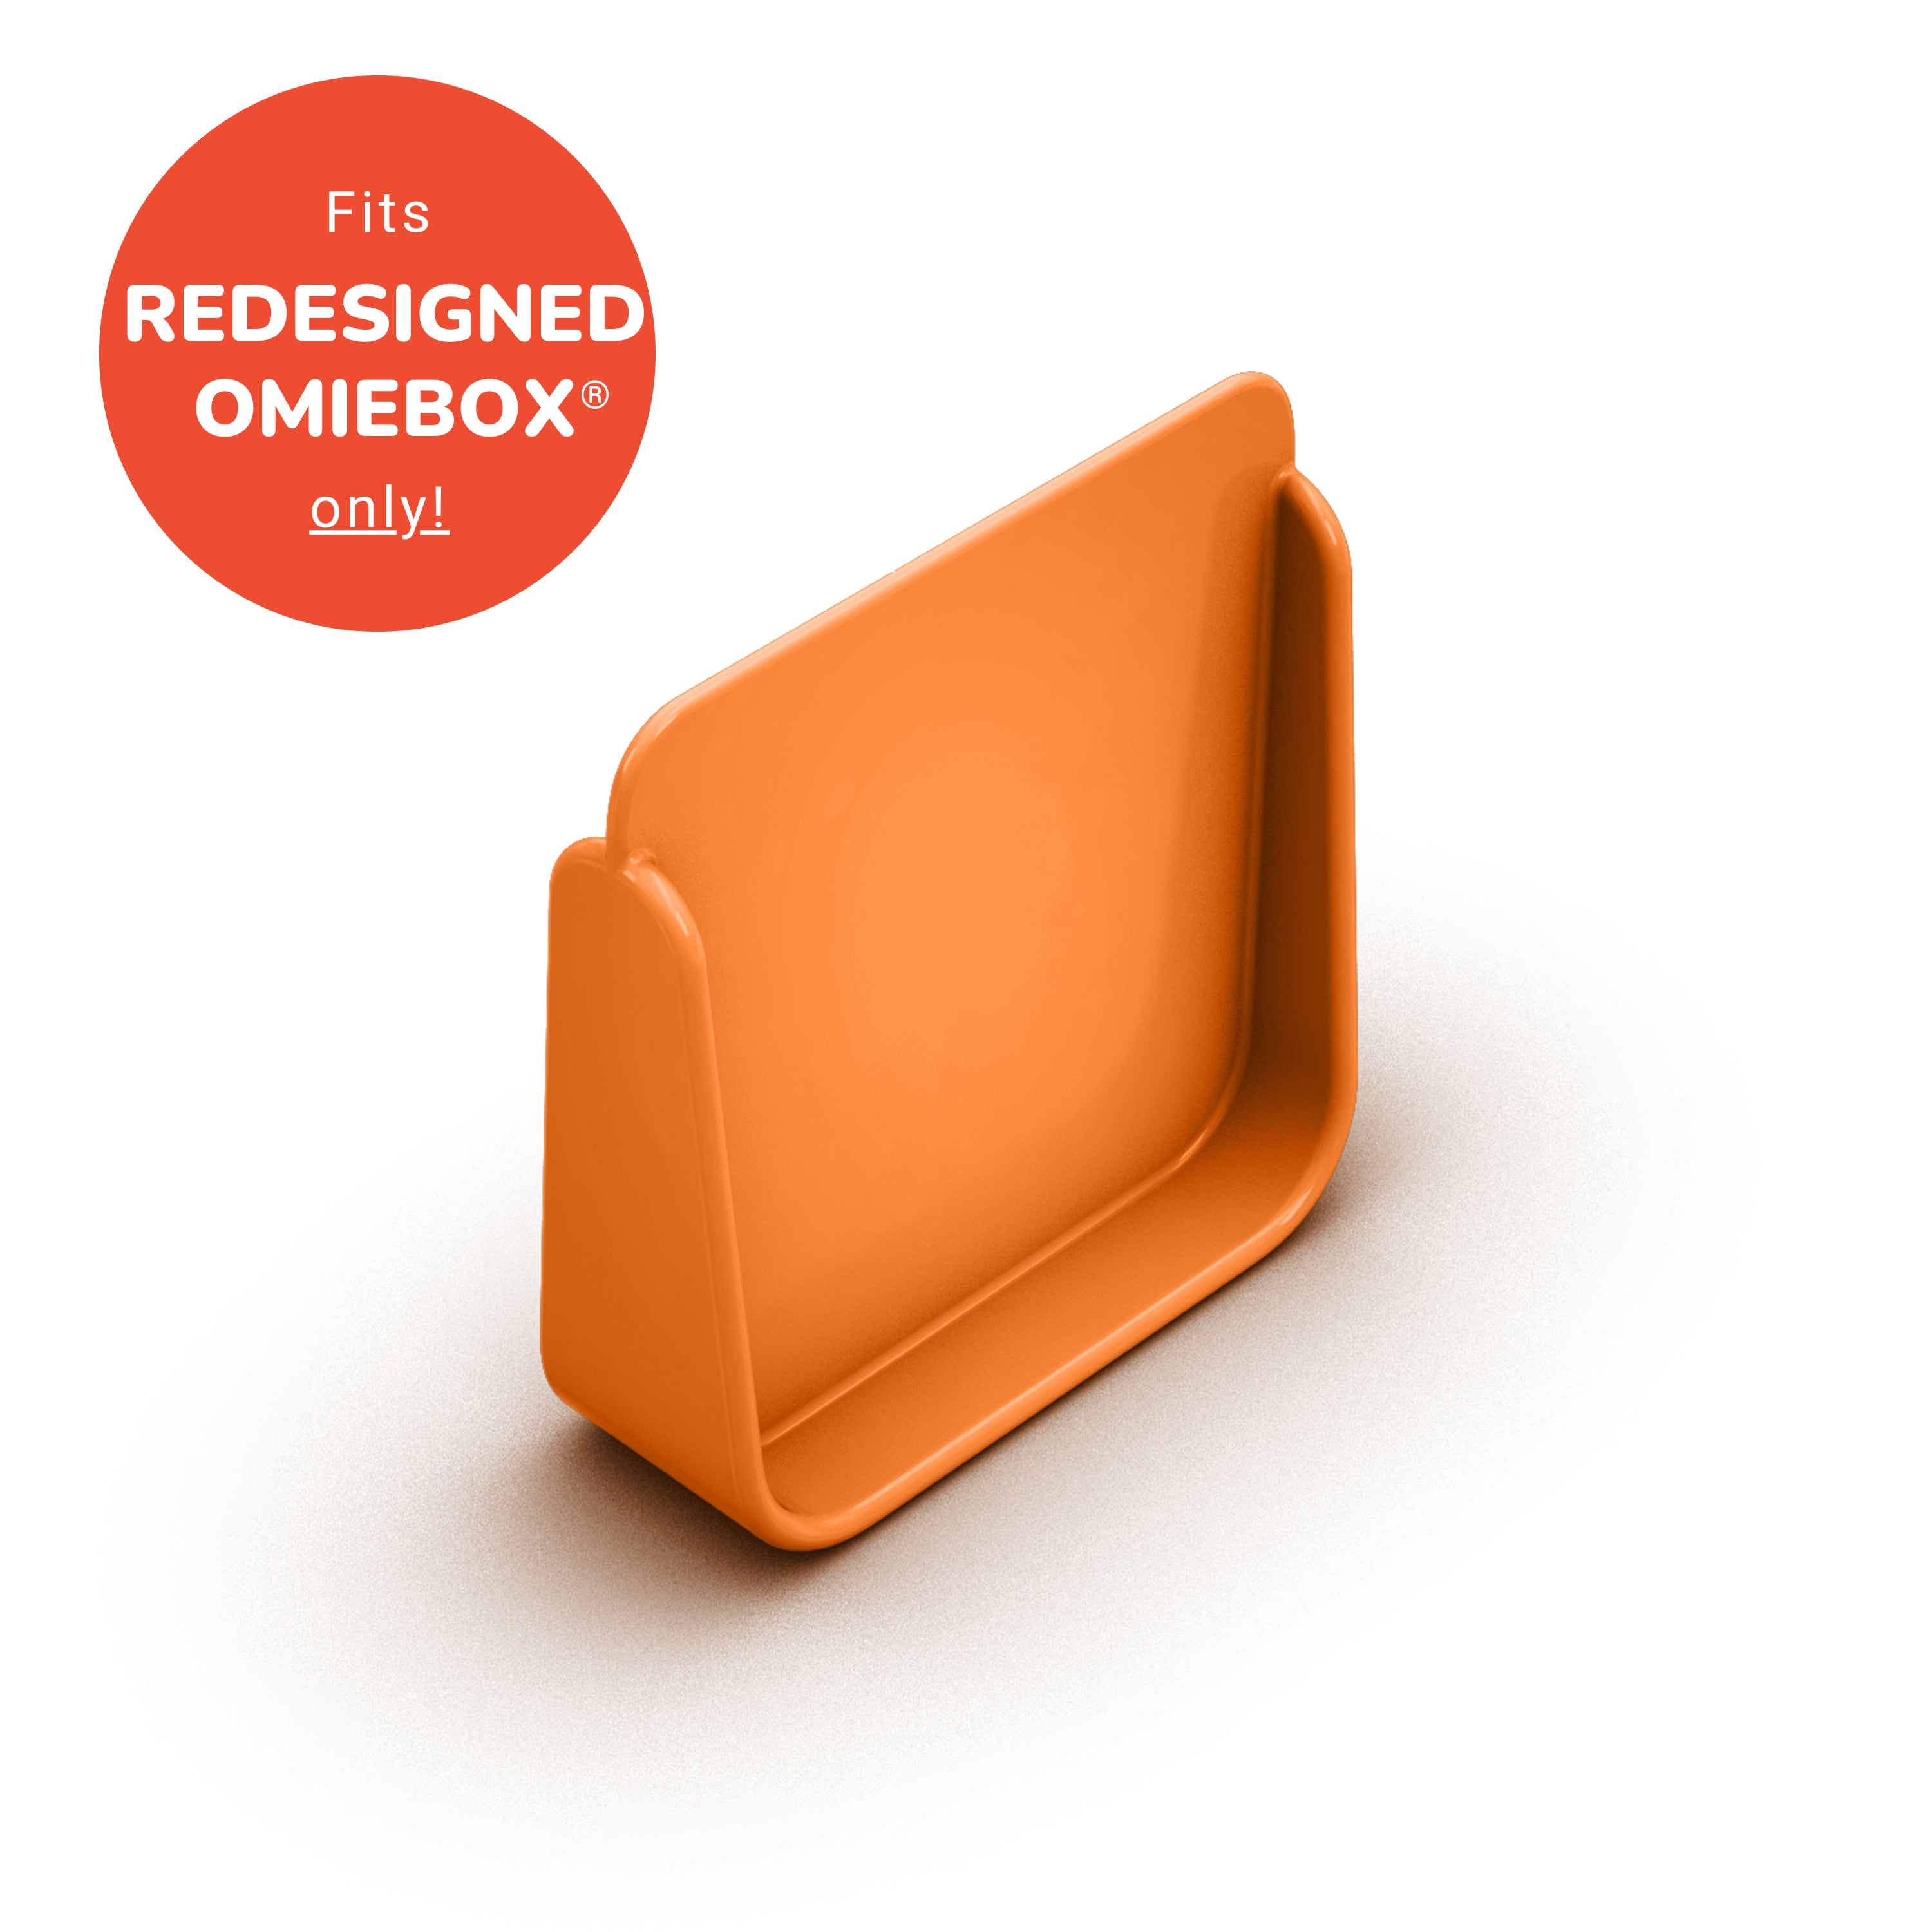 OmieboxSG on Instagram: When you purchase an Omiebox, a divider will come  with it. The removable divider is used to create more compartments so that  it makes it flexible for you to